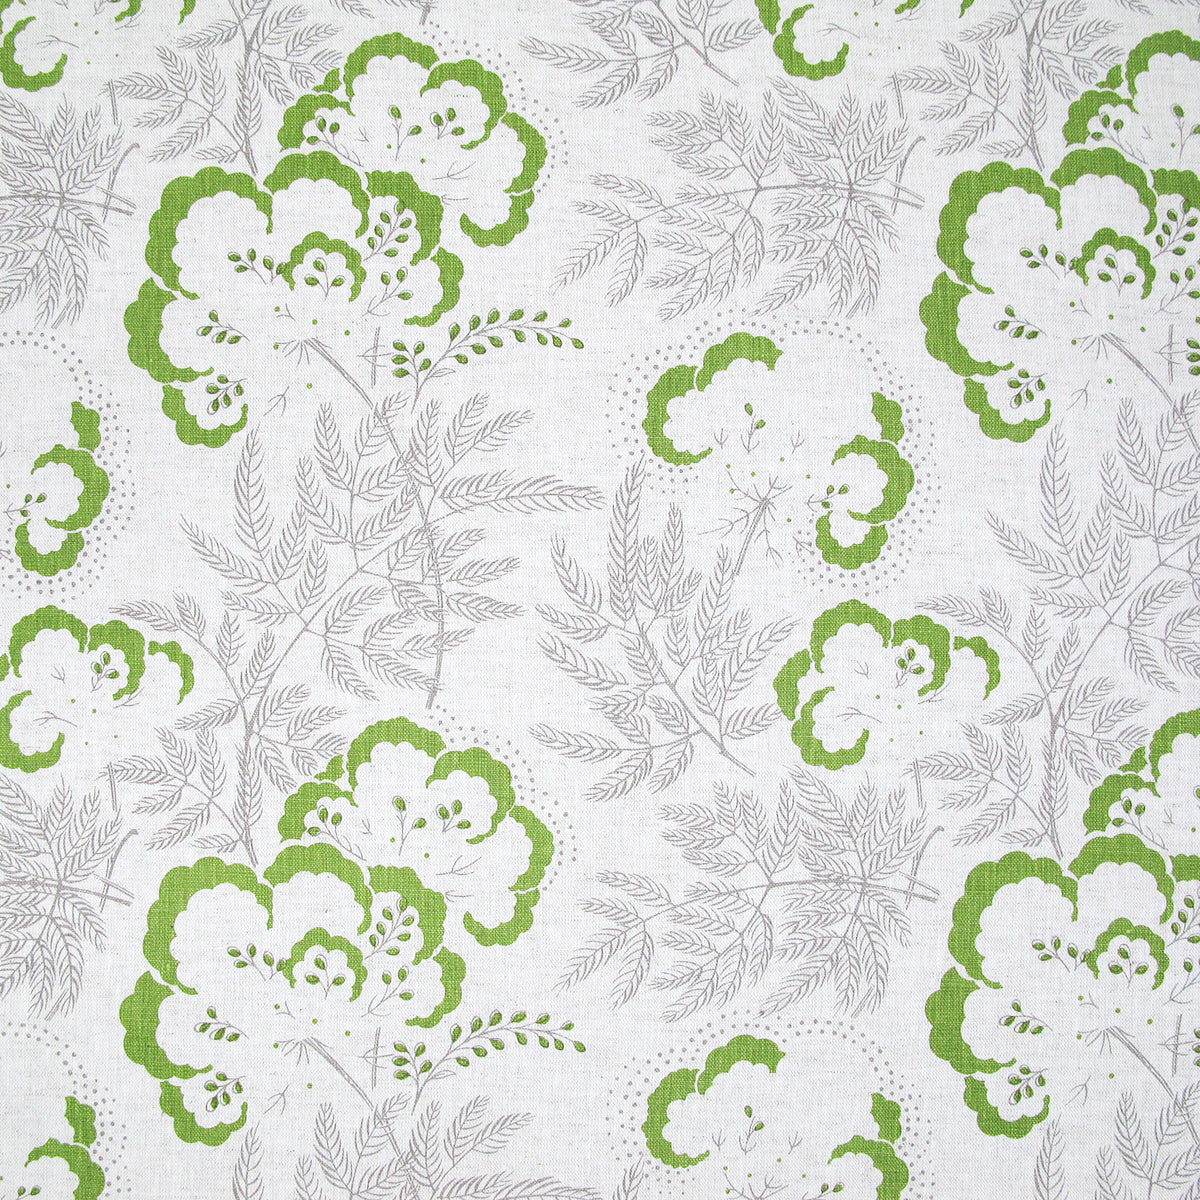 Detail of fabric in an intricate floral print in green and gray on a white field.